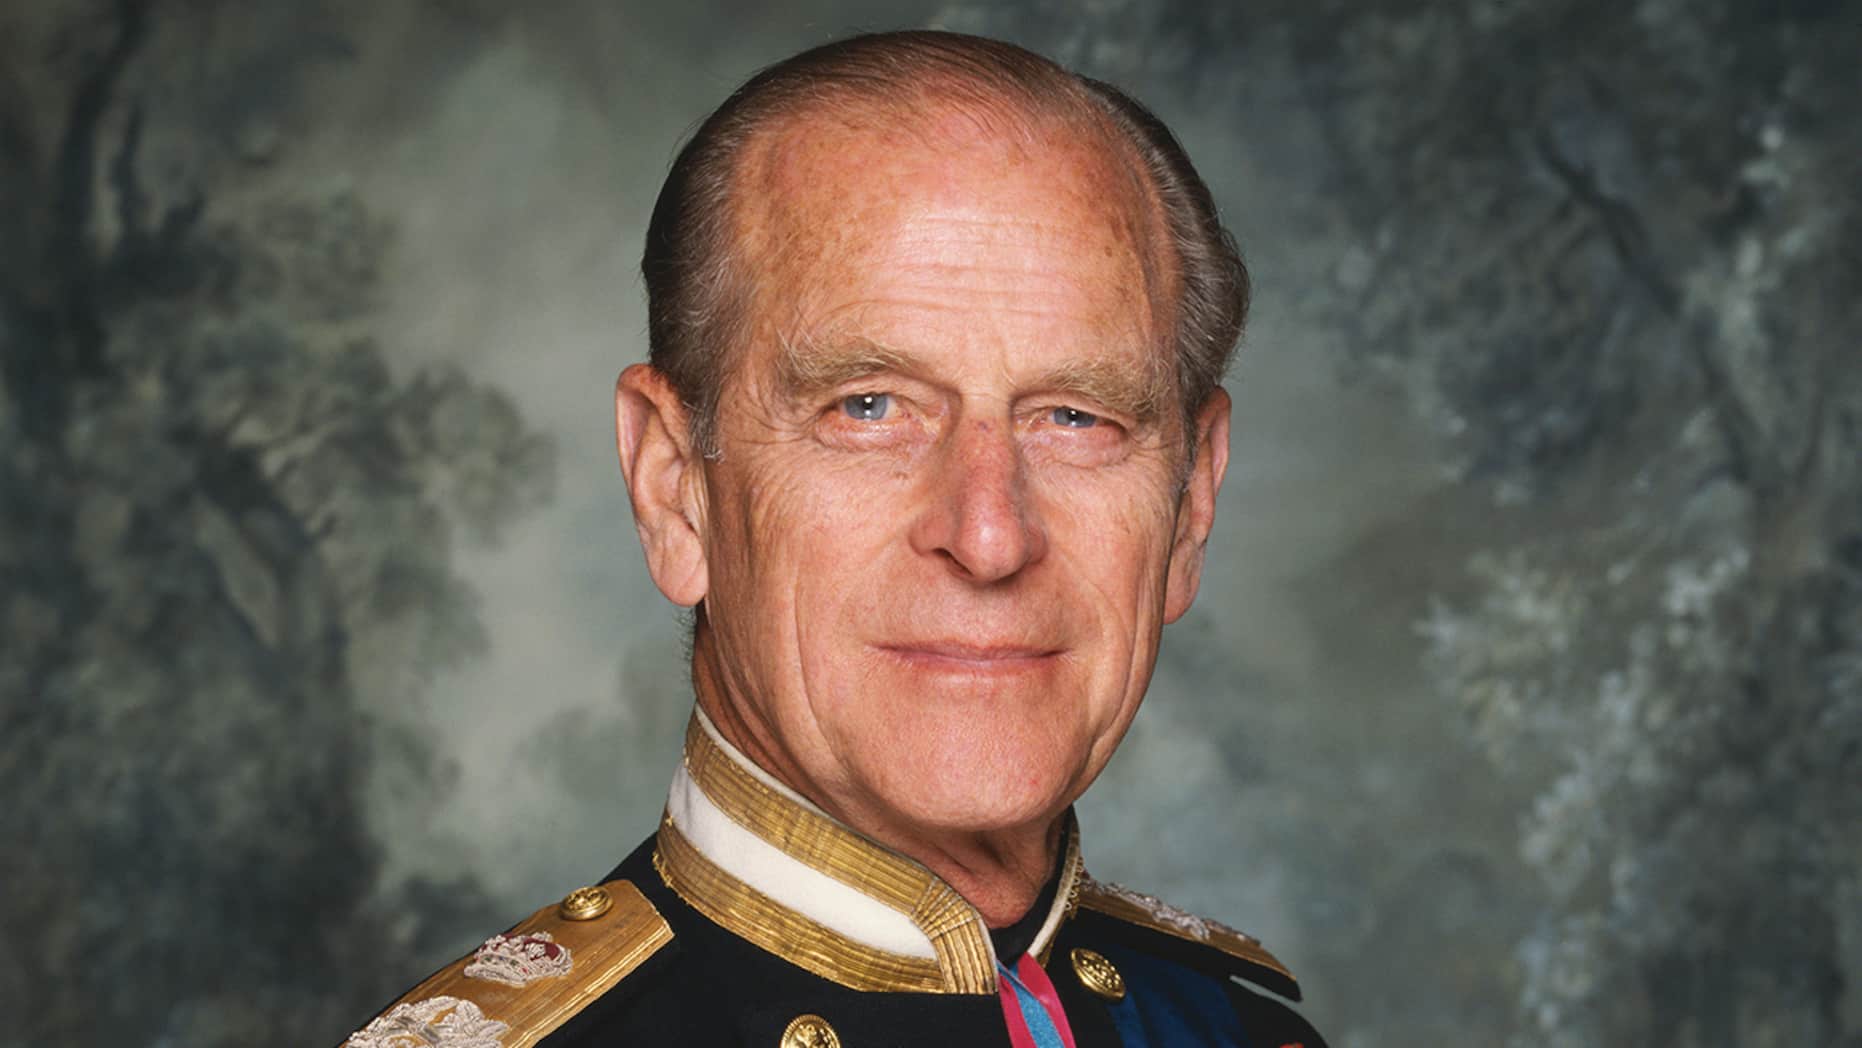 All Those Titles Don't Mean Anything In Heaven: Prince Philip Dead at 99, Pray For His Soul